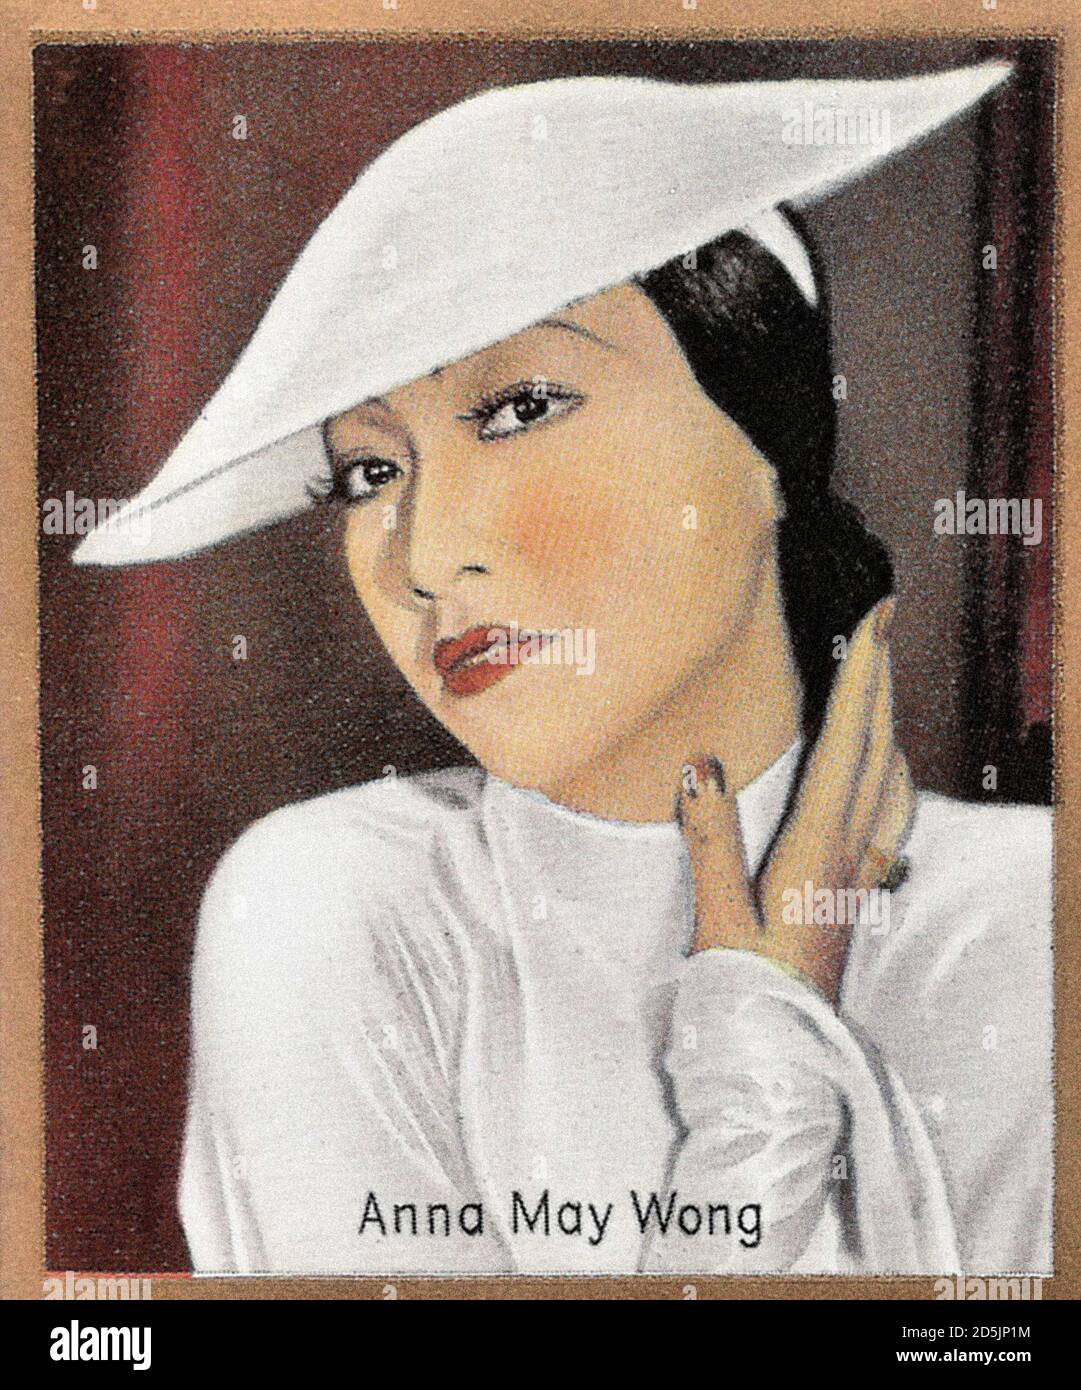 Anna May Wong (born Wong Liu Tsong; 1905 – 1961) was an American actress, considered to be the first Chinese American Hollywood movie star, as well as Stock Photo